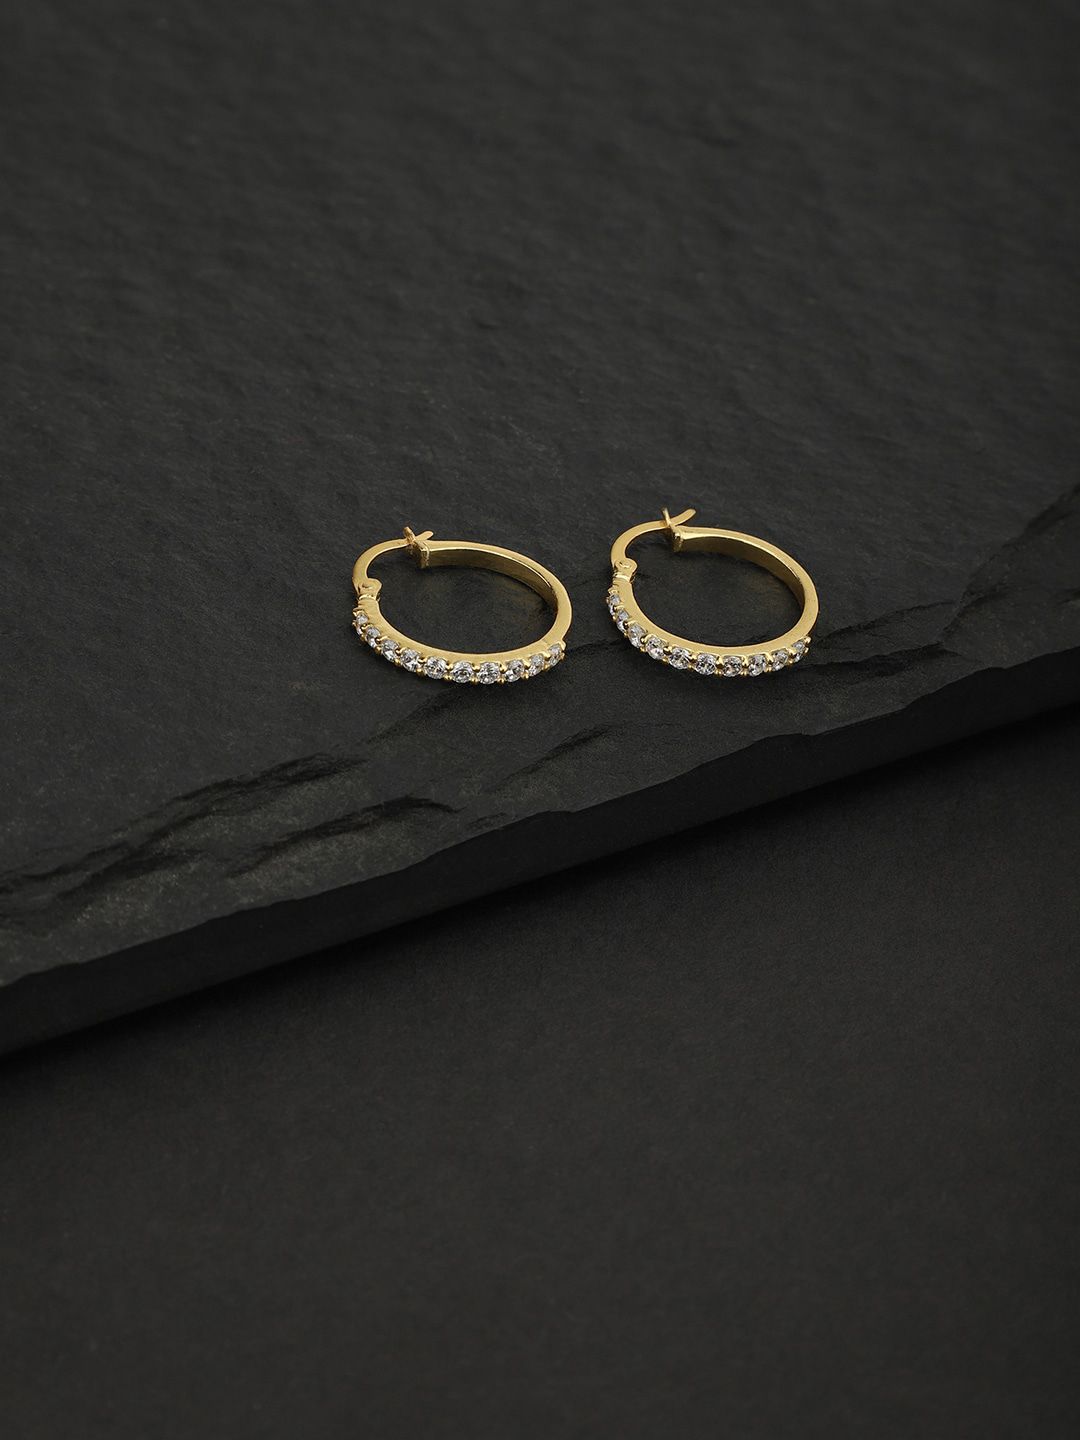 Carlton London White Contemporary Hoop Earrings Price in India